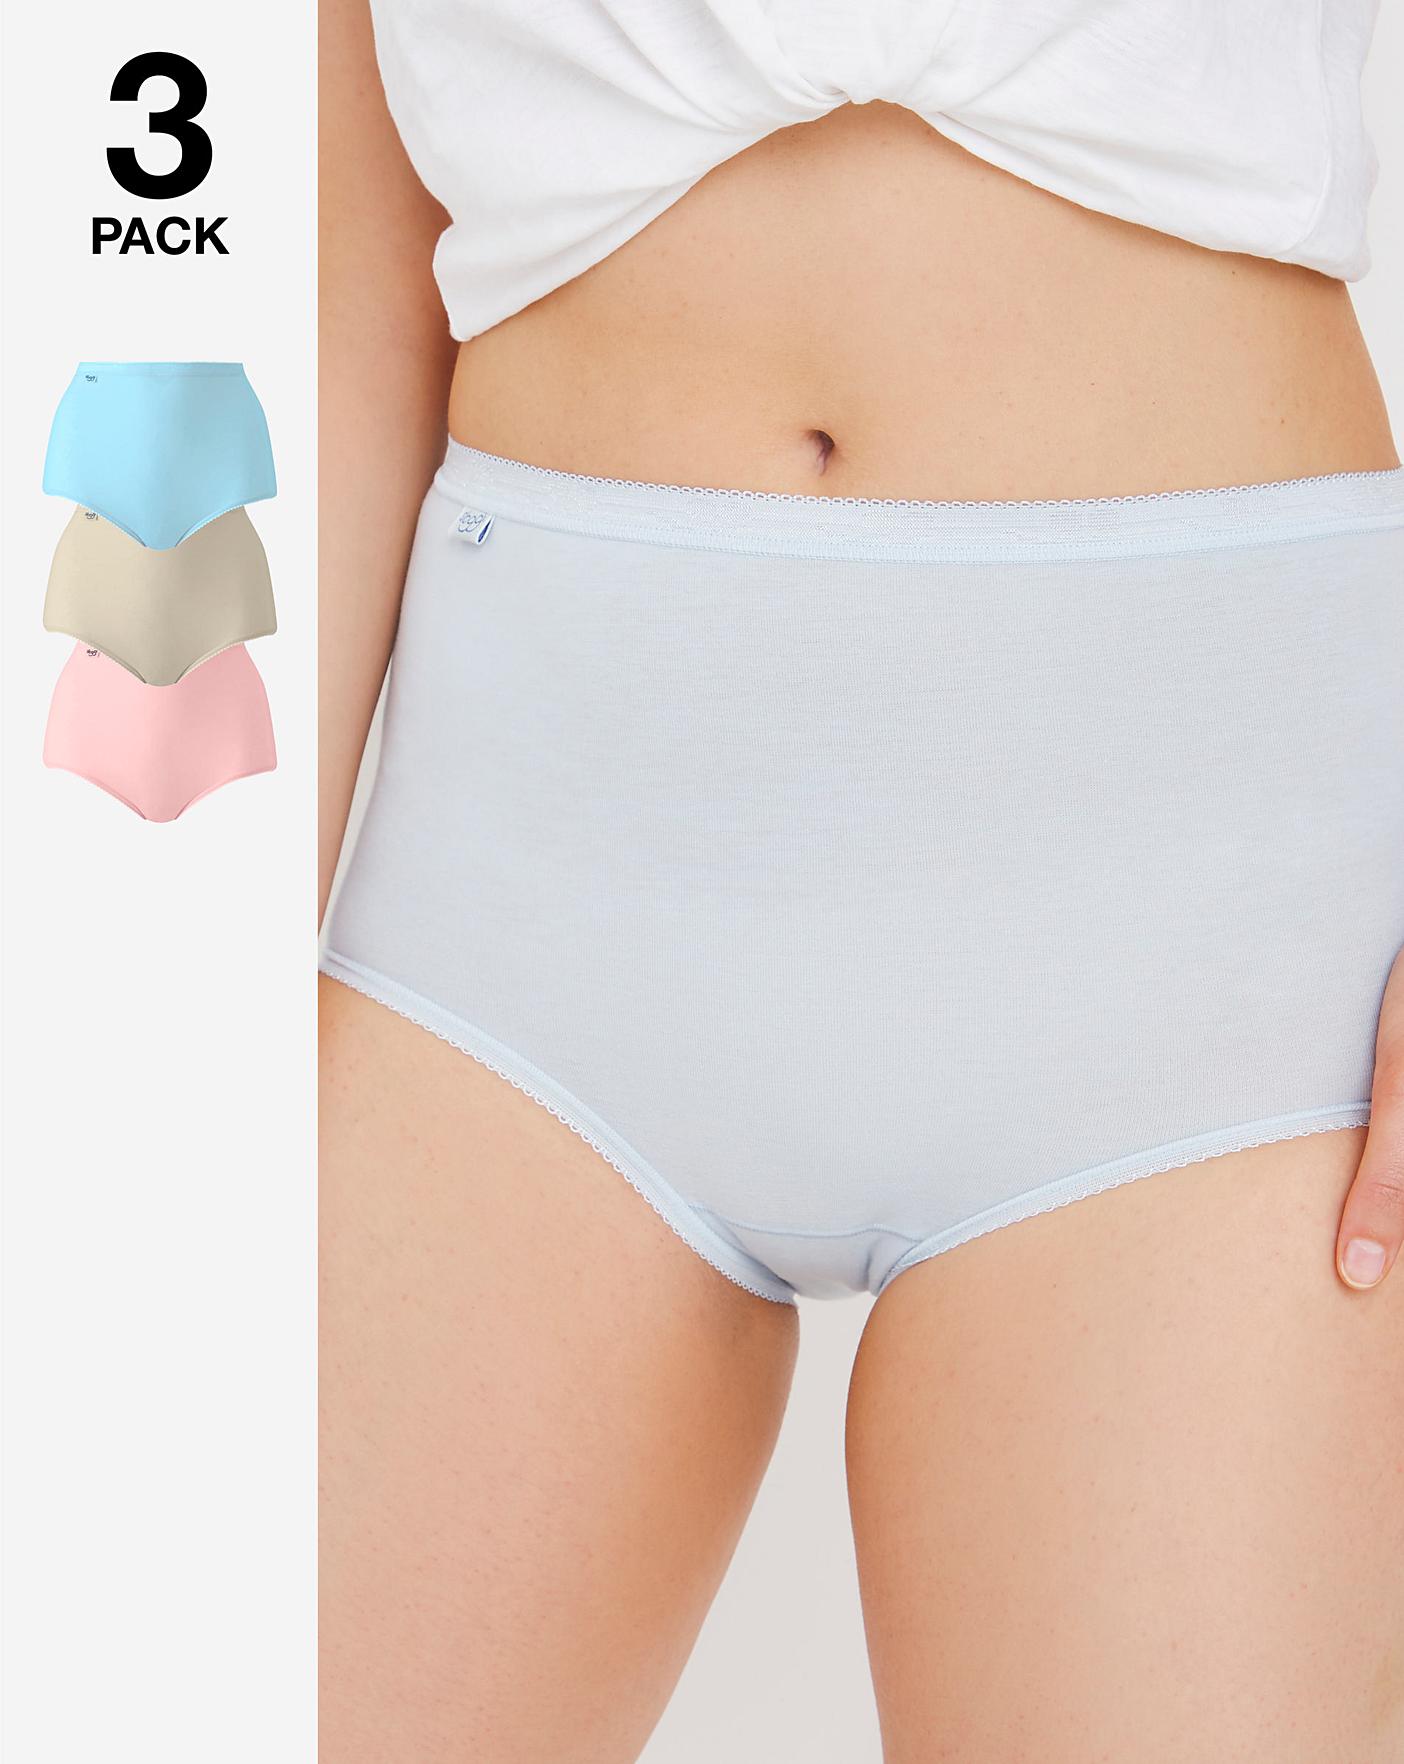 Pack of 4 basic maxi knickers in cotton Sloggi